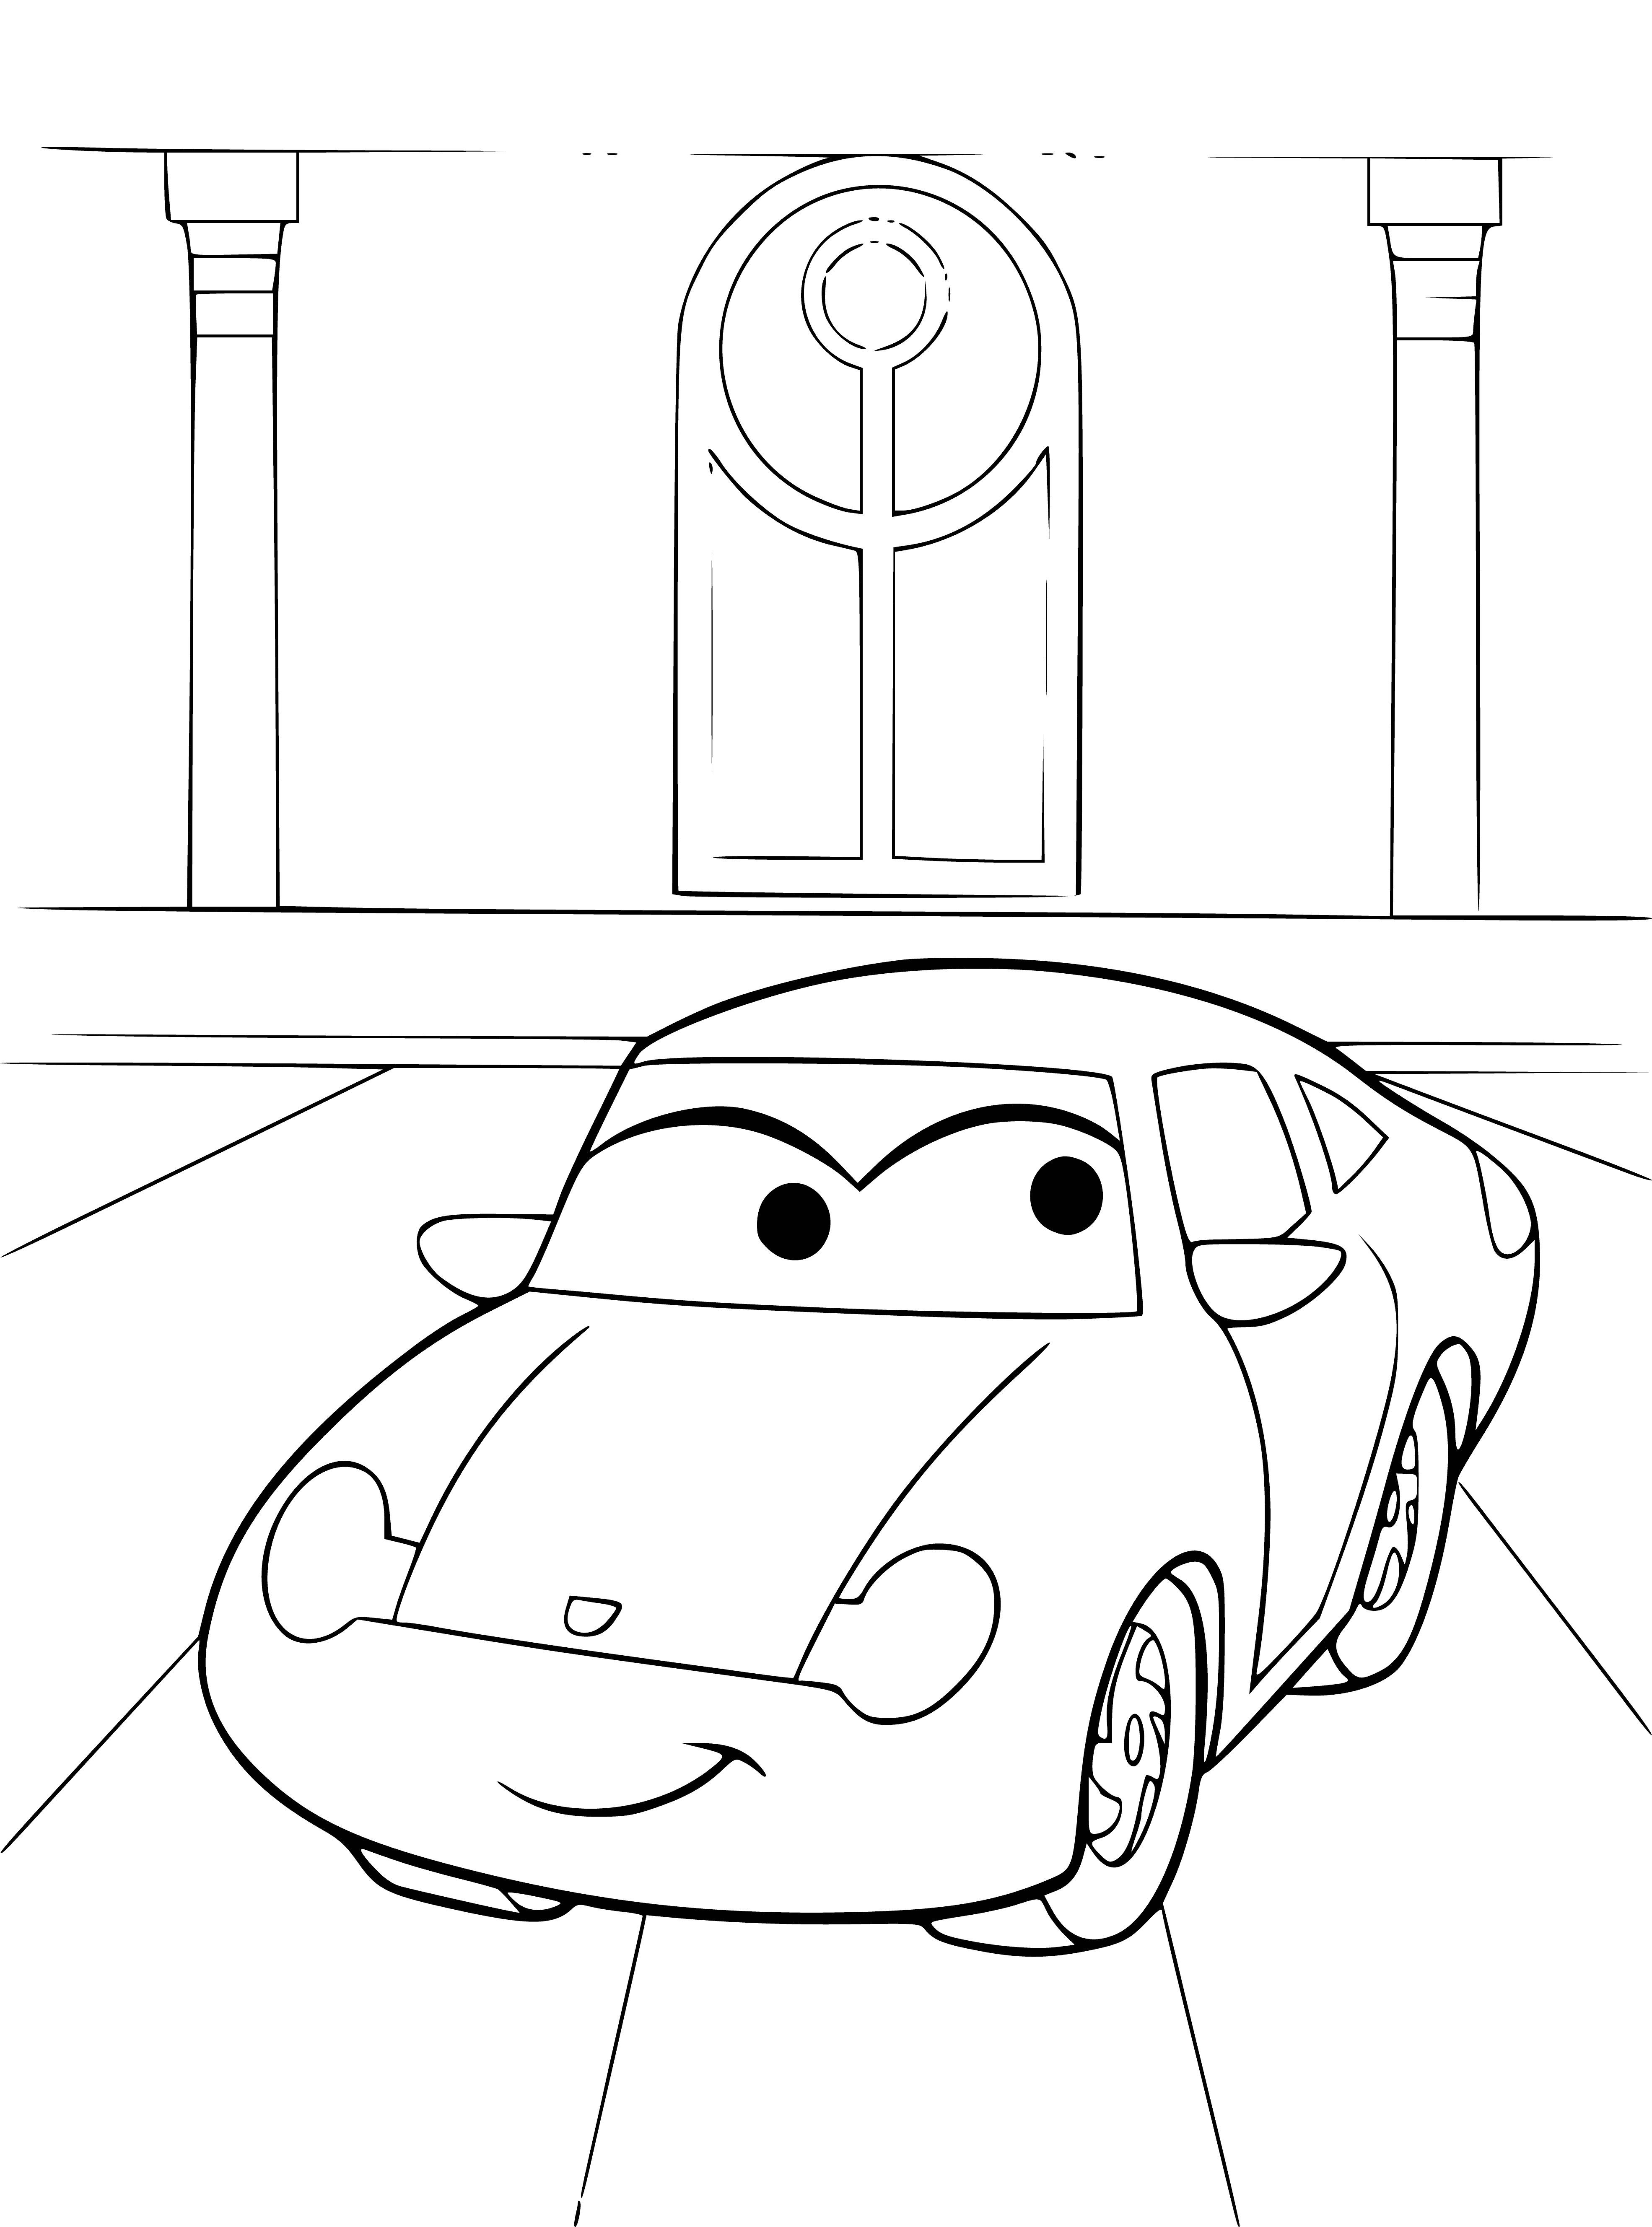 coloring page: Sally is a red car with white roof and black stripe, four round headlights, 6-bar grille, and two round taillights.